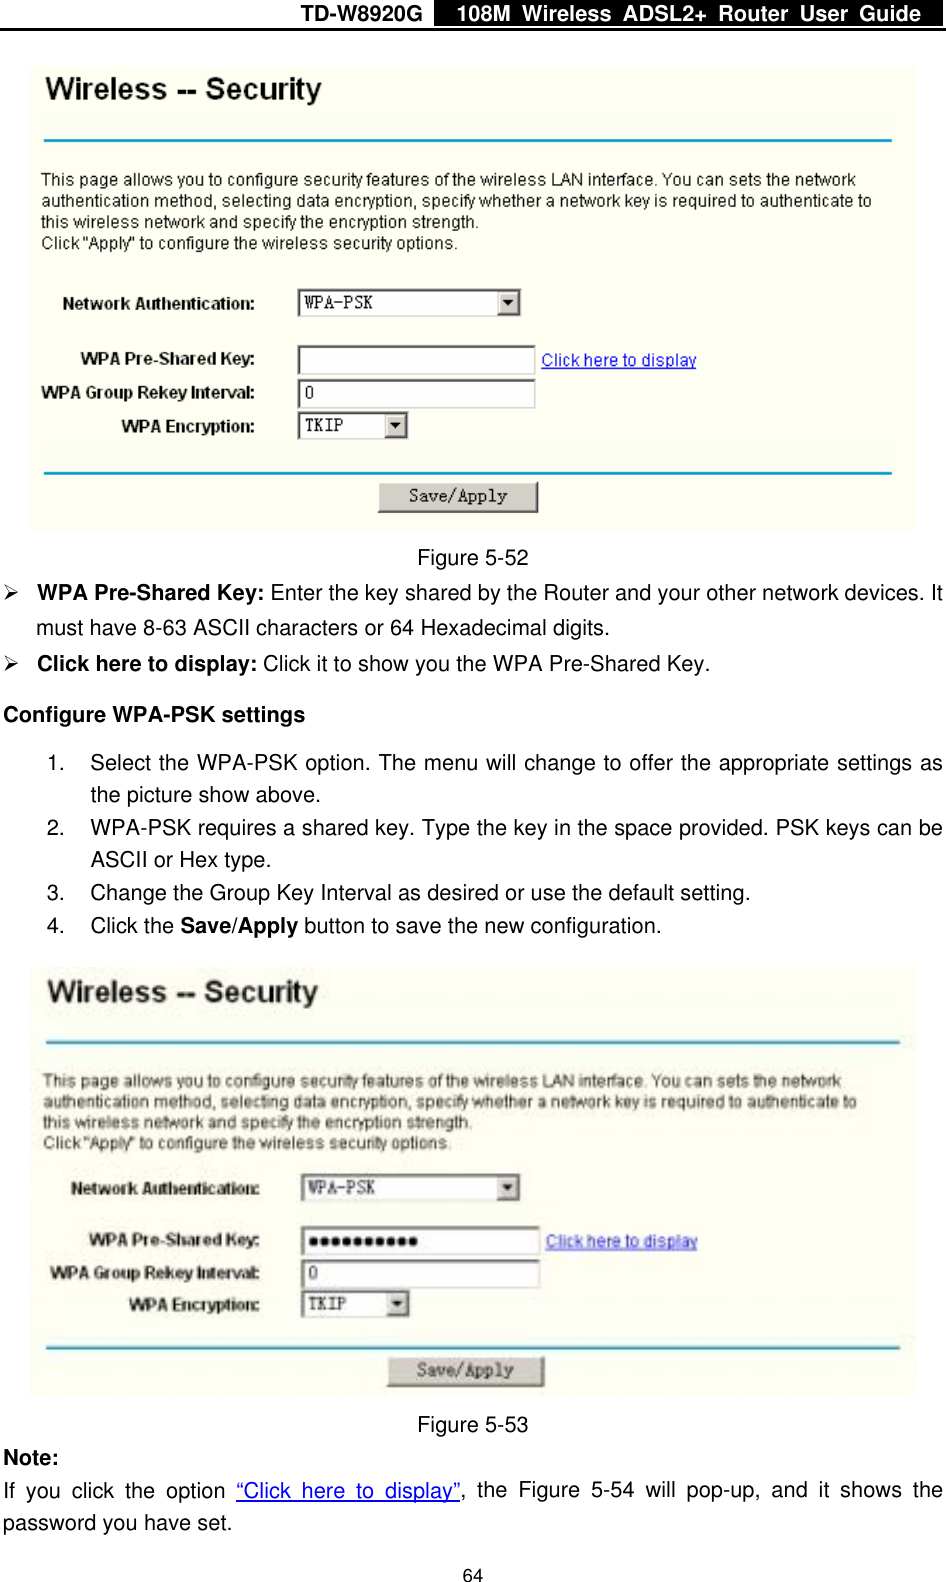 TD-W8920G    108M Wireless ADSL2+ Router User Guide    64 Figure 5-52 ¾ WPA Pre-Shared Key: Enter the key shared by the Router and your other network devices. It must have 8-63 ASCII characters or 64 Hexadecimal digits. ¾ Click here to display: Click it to show you the WPA Pre-Shared Key. Configure WPA-PSK settings 1.  Select the WPA-PSK option. The menu will change to offer the appropriate settings as the picture show above. 2.  WPA-PSK requires a shared key. Type the key in the space provided. PSK keys can be ASCII or Hex type. 3.  Change the Group Key Interval as desired or use the default setting. 4. Click the Save/Apply button to save the new configuration.  Figure 5-53 Note: If you click the option “Click here to display”, the Figure 5-54 will pop-up, and it shows the password you have set. 